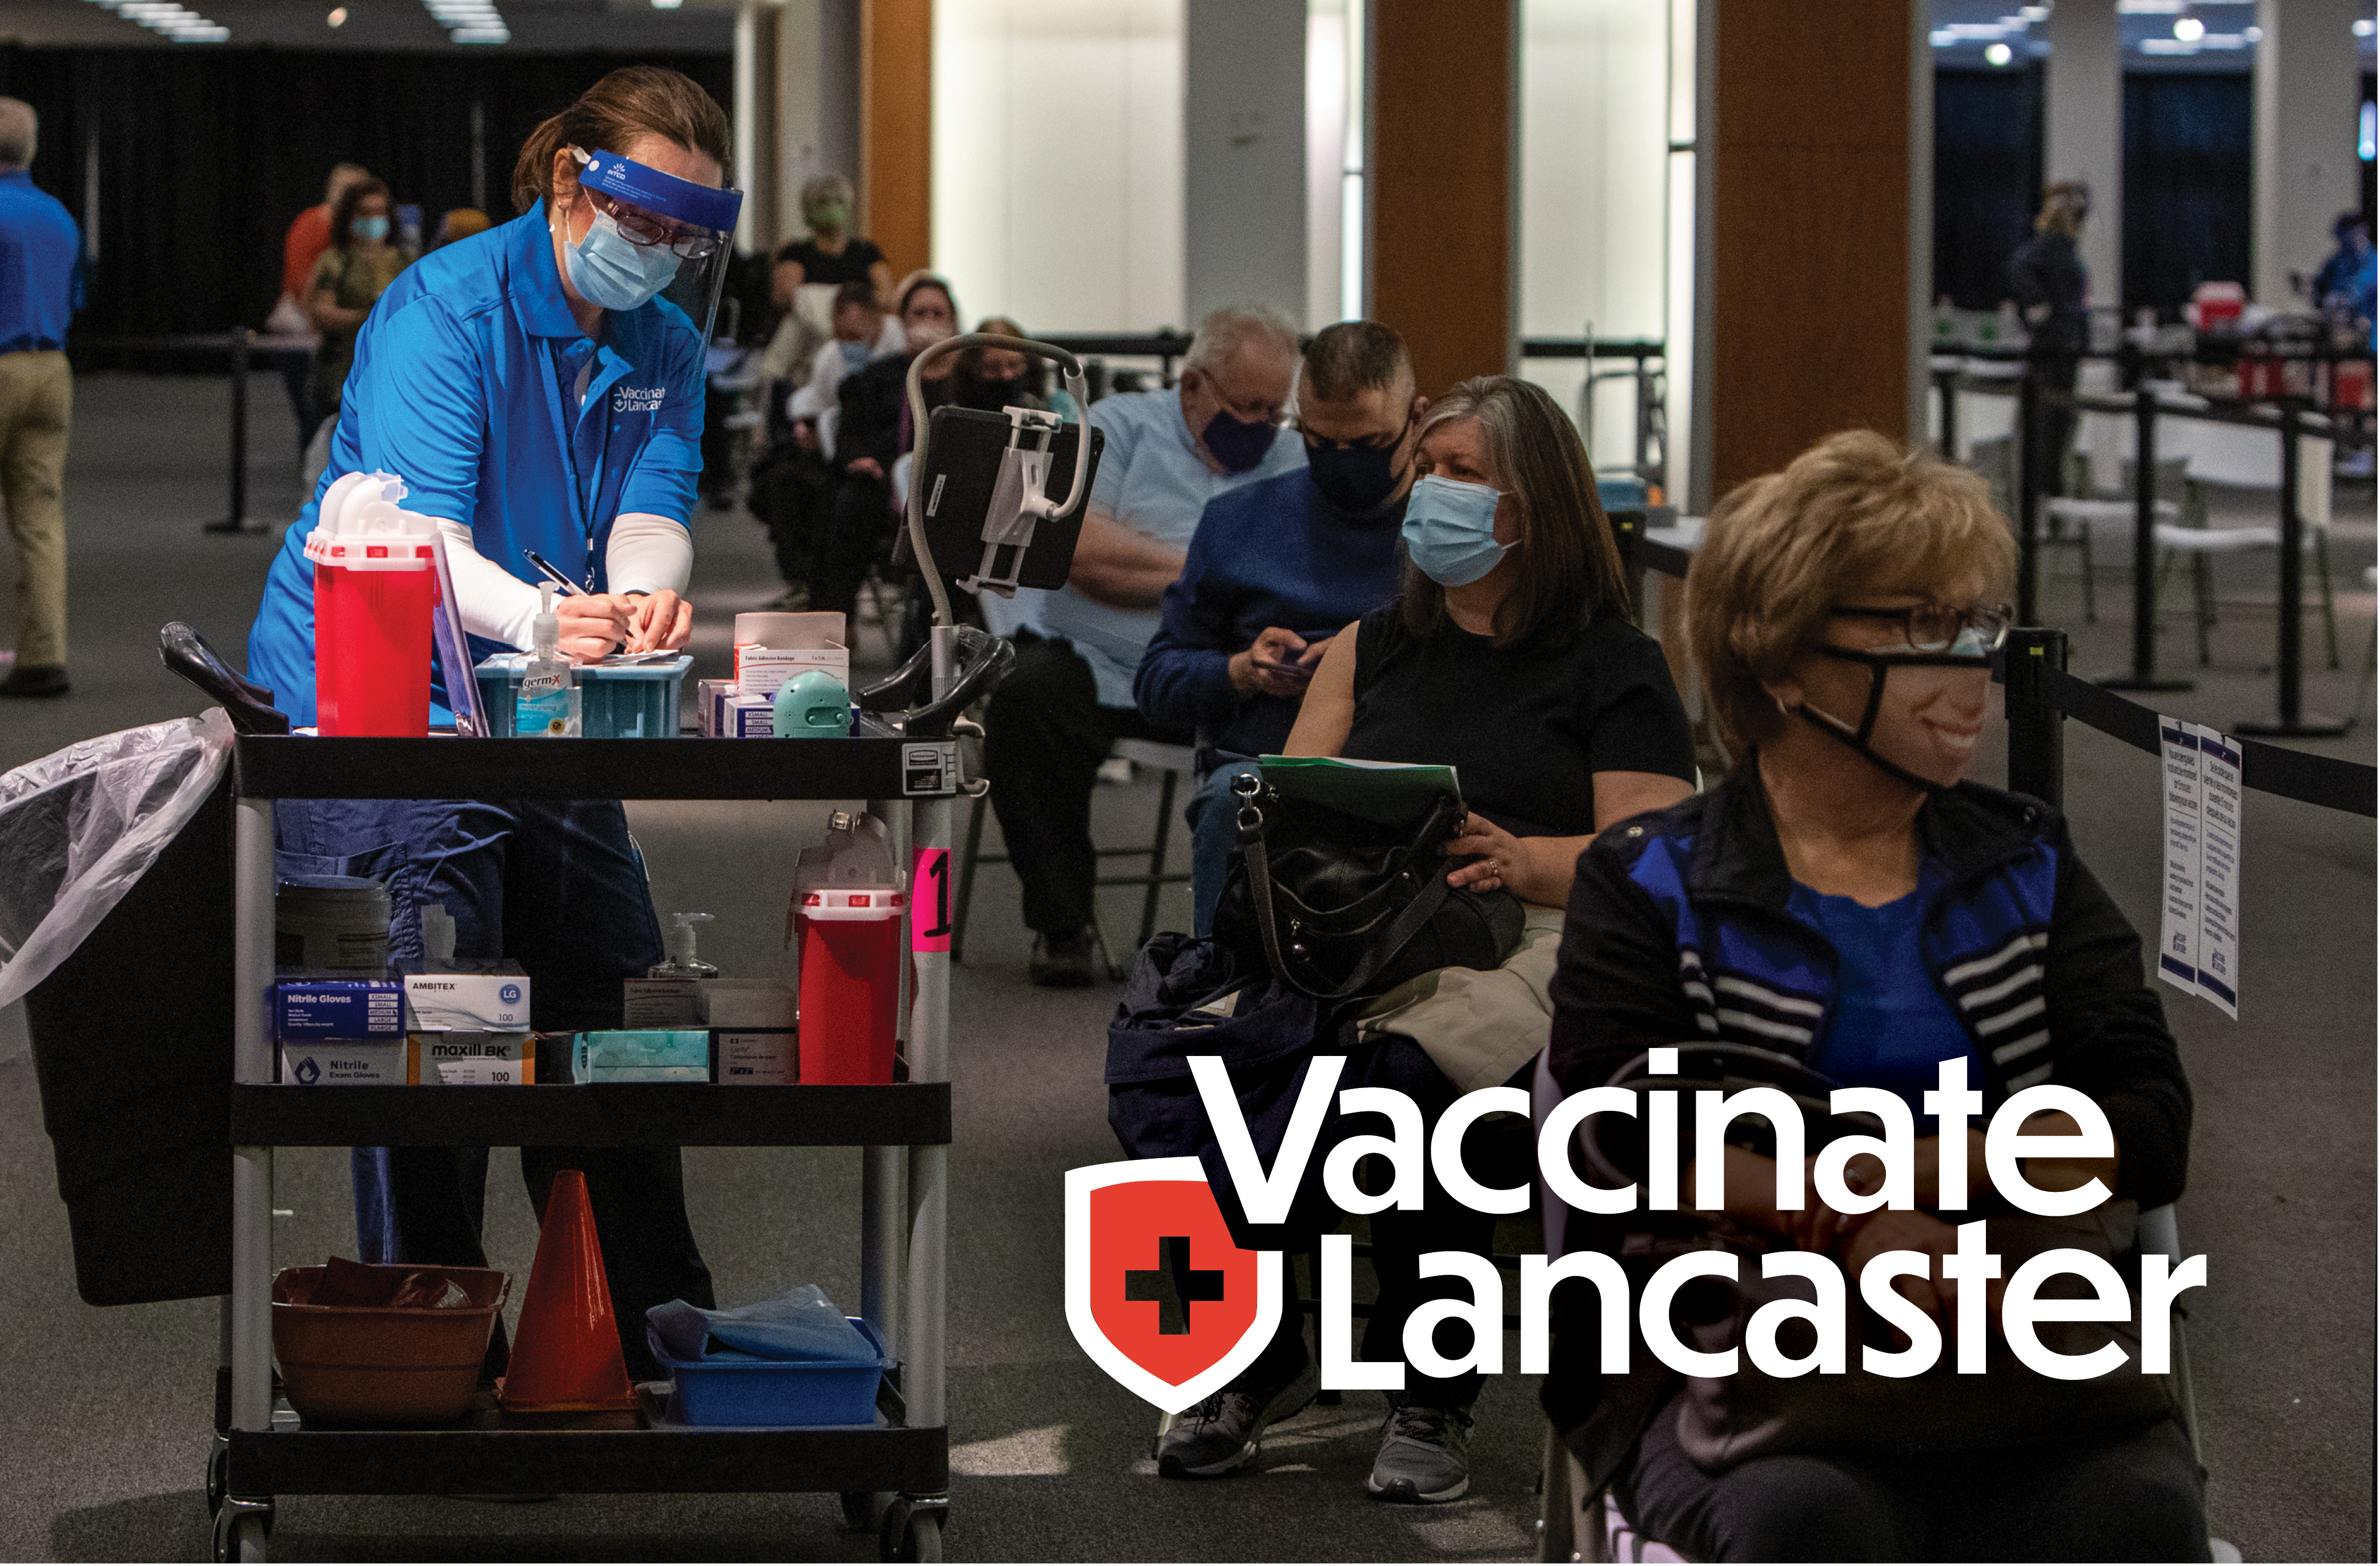 Lancaster community members at a COVID-19 vaccination center